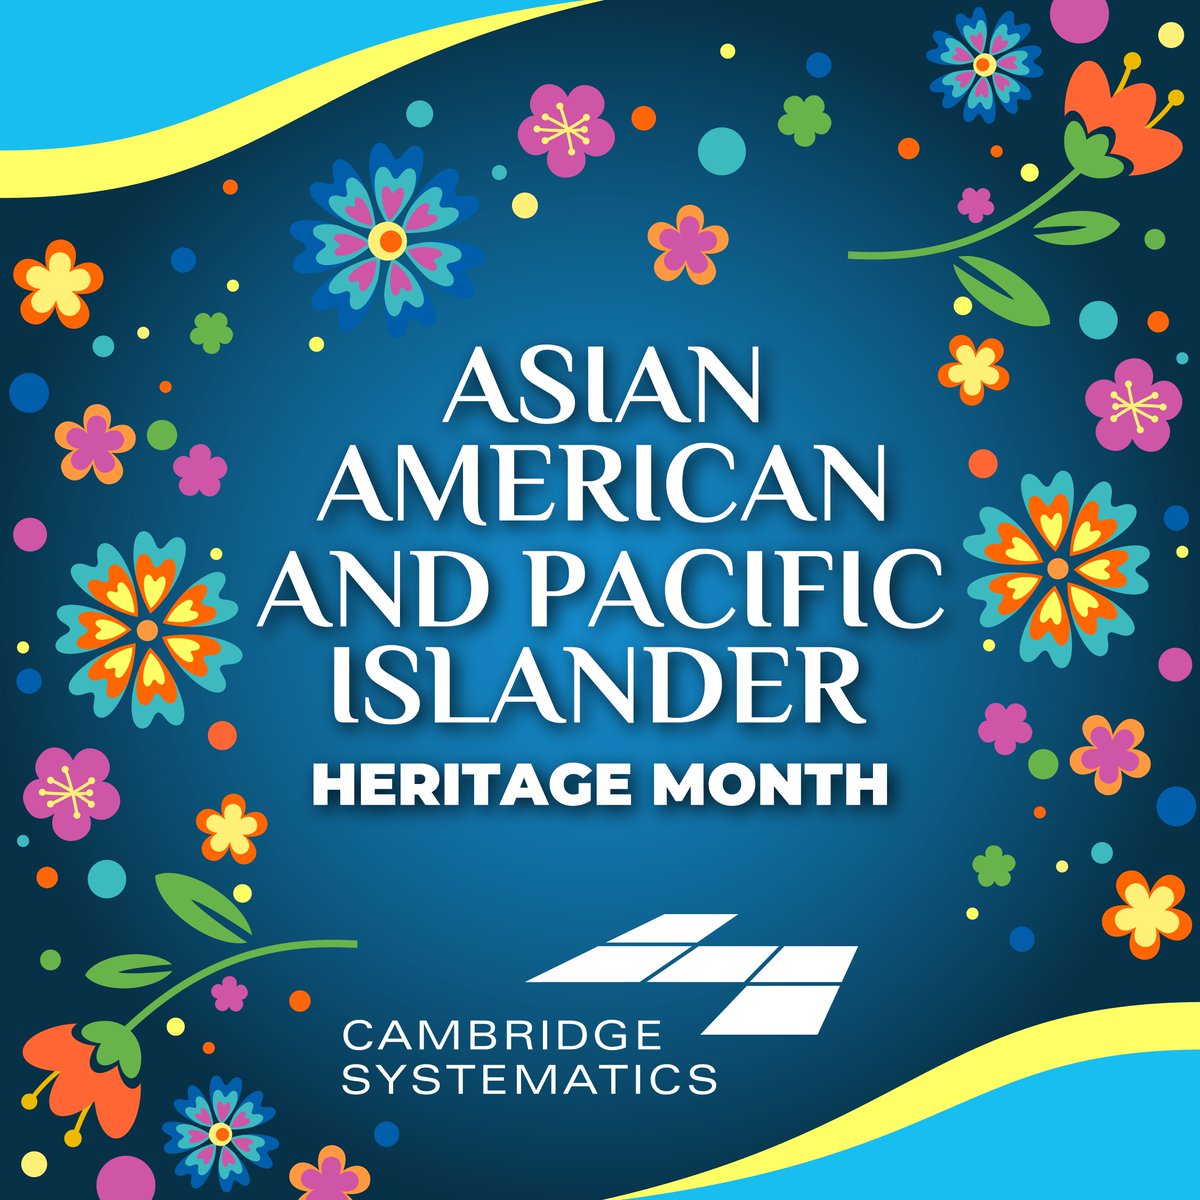 Happy AAPI Month! 🌸 Did you know the term AAPI includes people from over 75 countries, speaking over 100 languages! To learn more about AAPI diversity and identities, check out this fact sheet from @apigbv: hubs.la/Q02vHhWp0